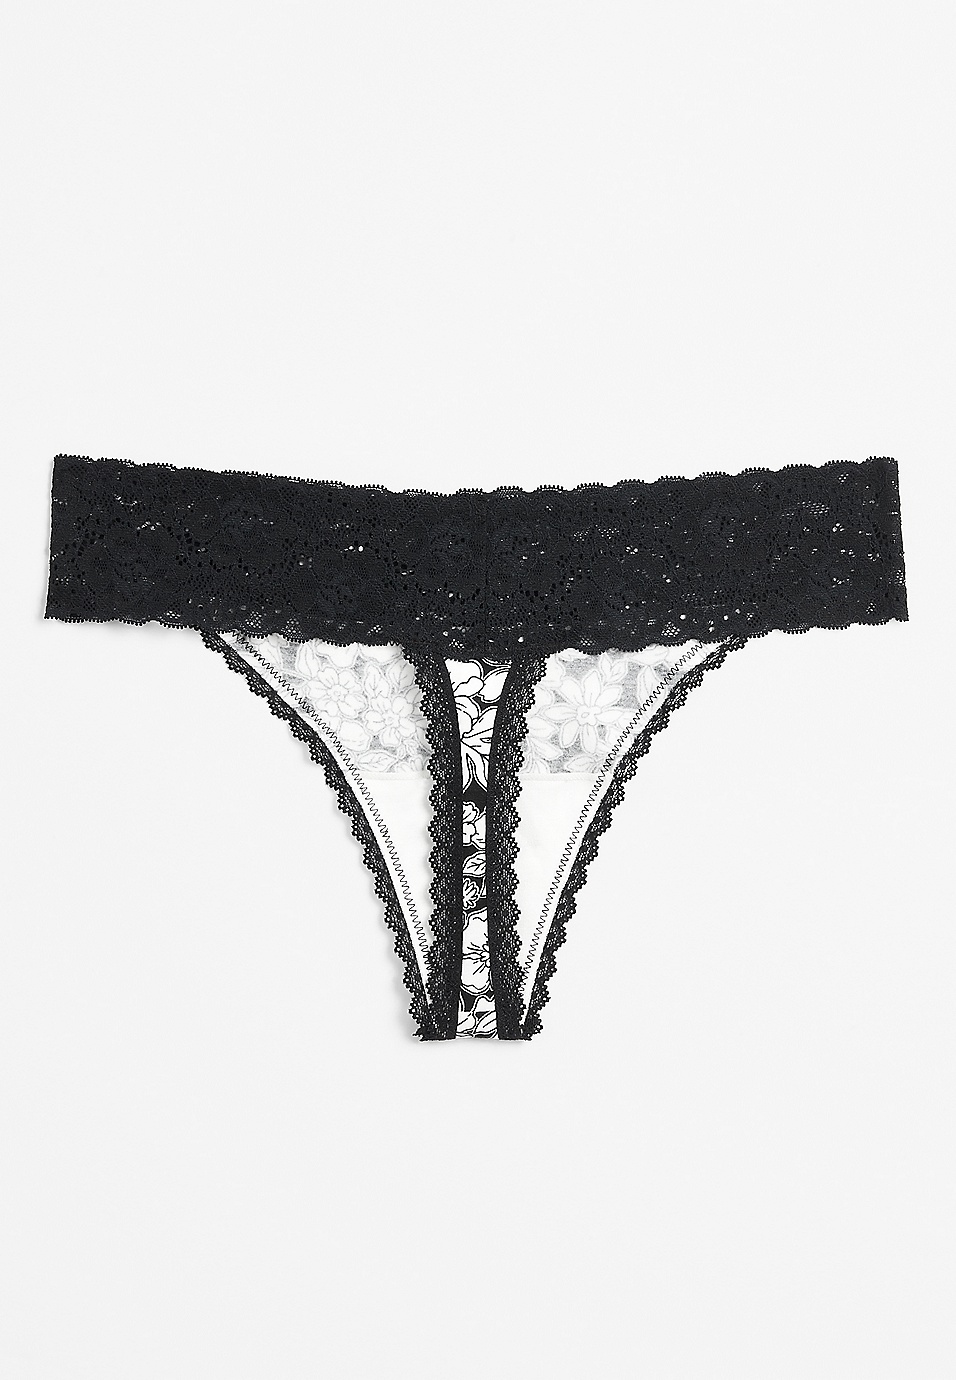 Black With Floral Lace Panties